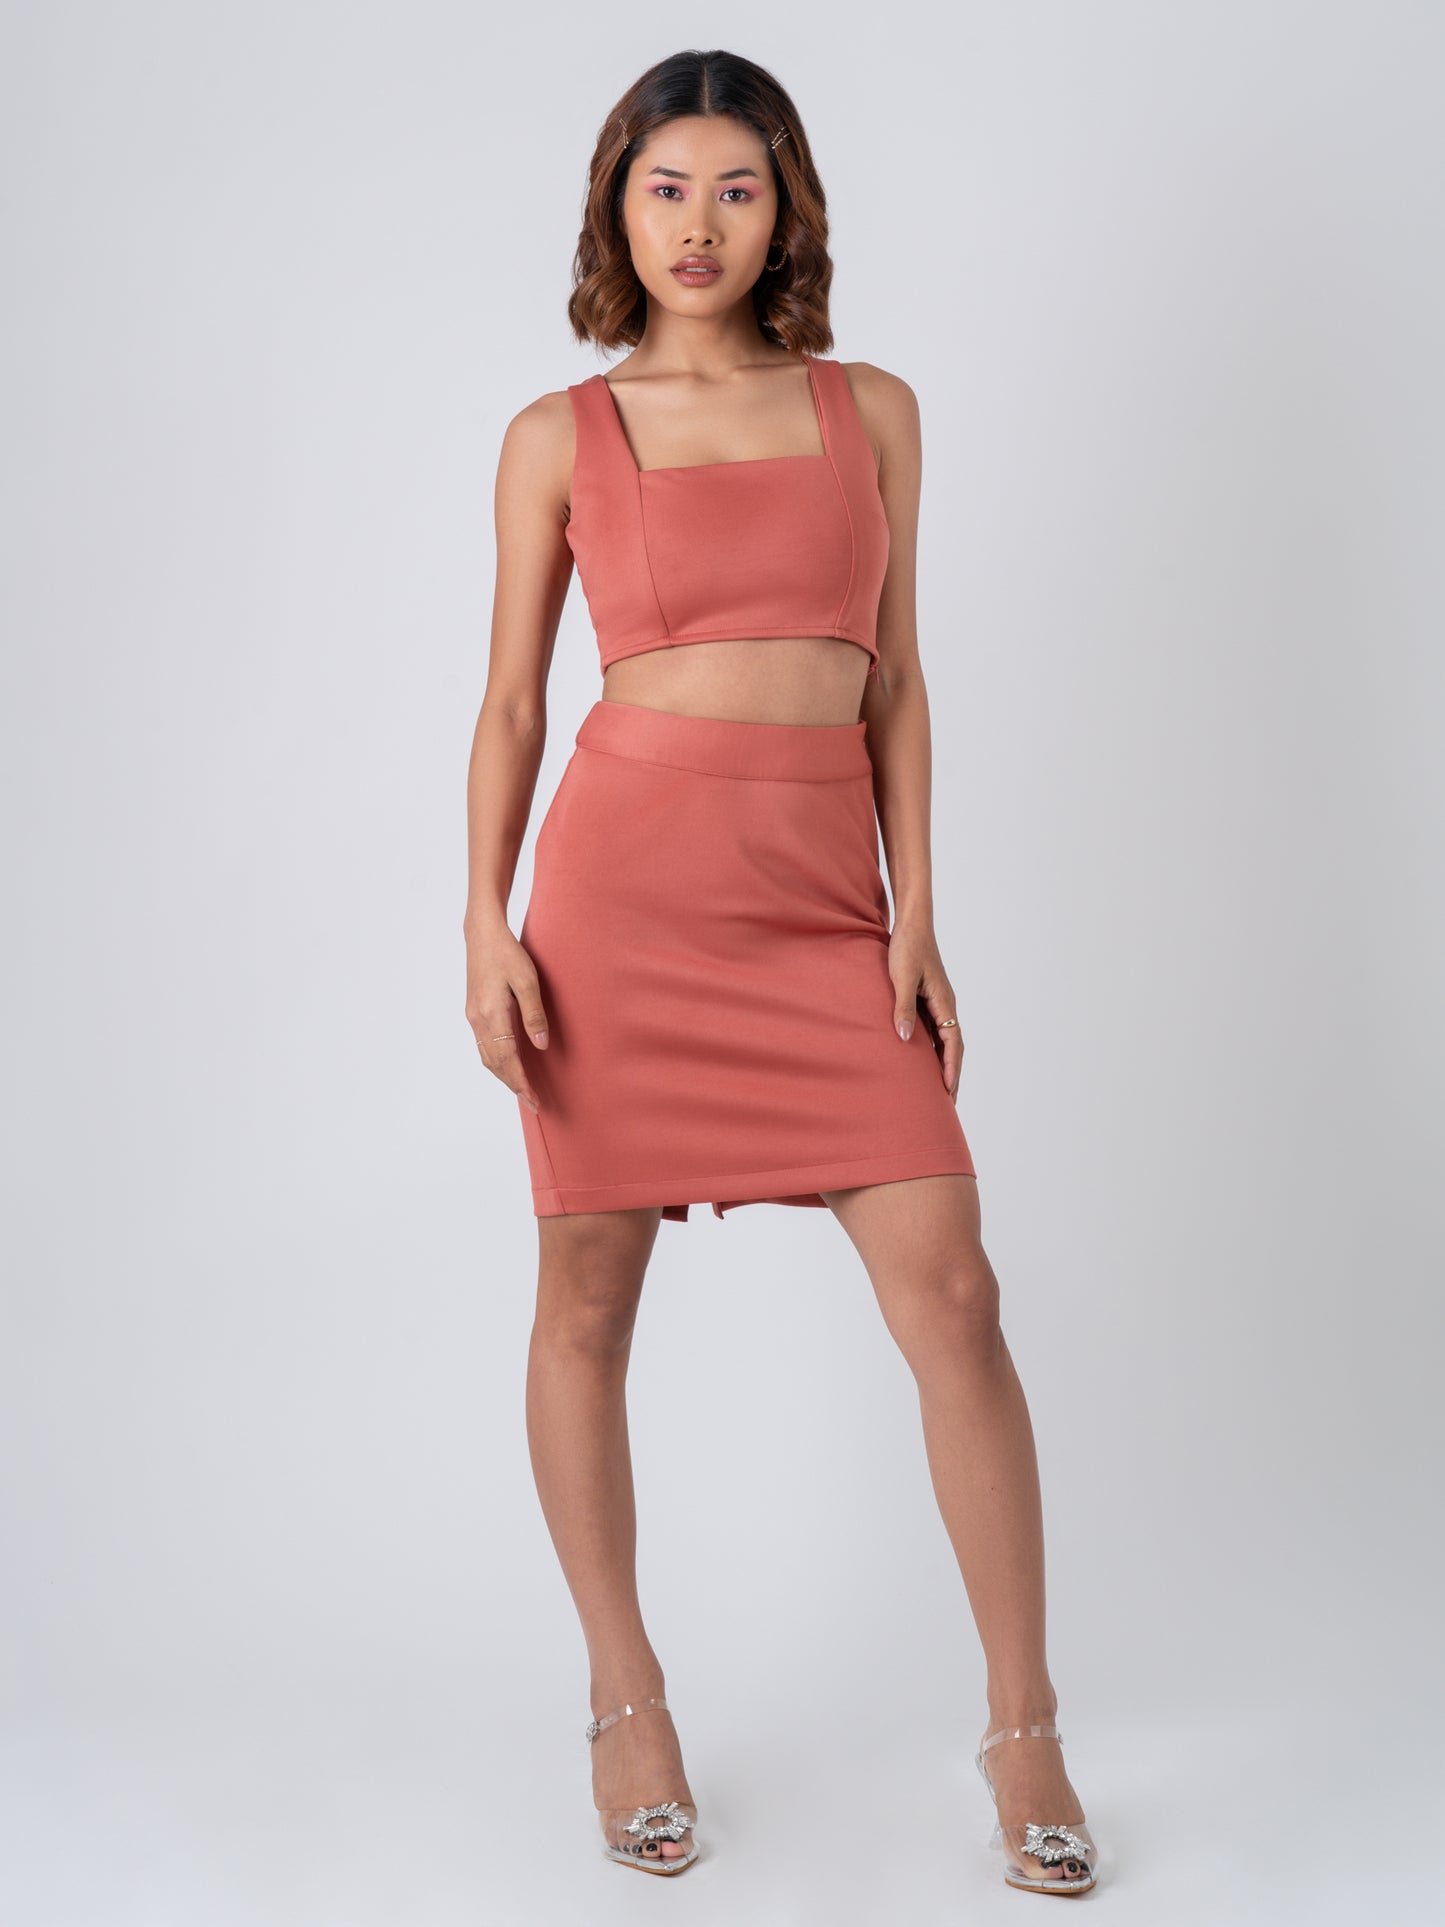 Solid Form Fitted Crop Top & Skirt Co-Ord set - Dusky Rose